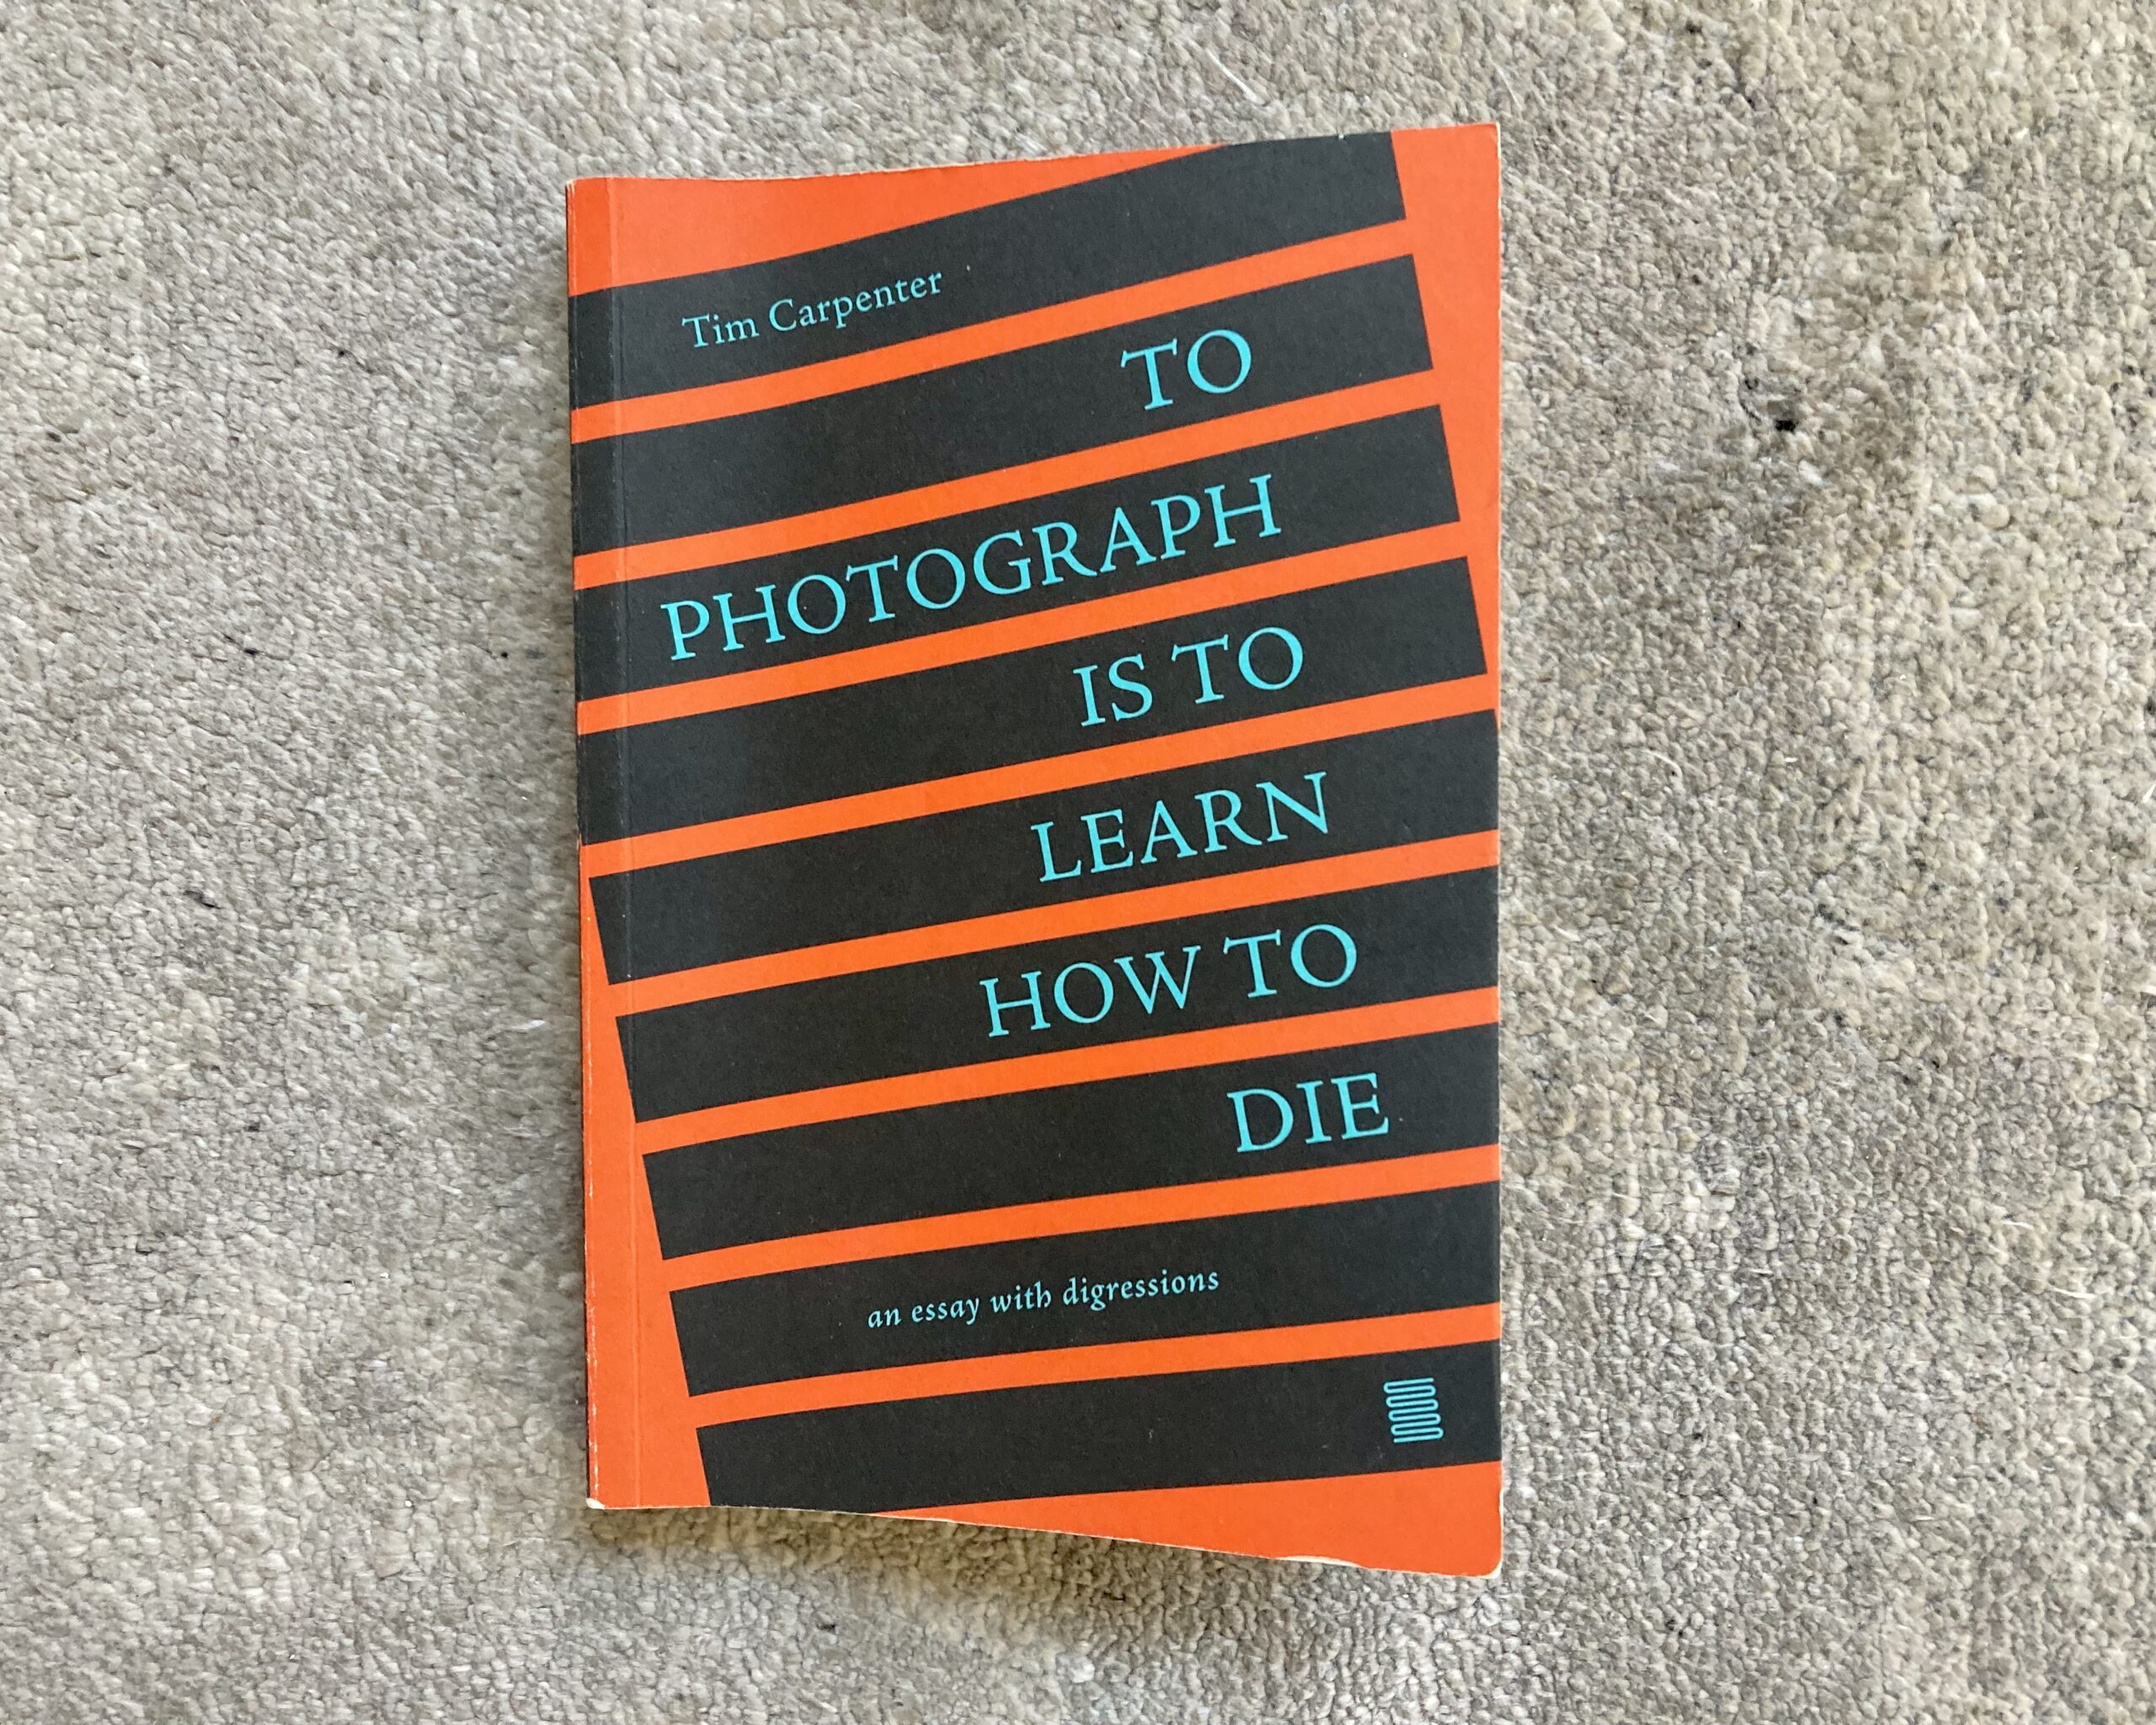 Book Synopsis: To Photograph is to Learn How to Die